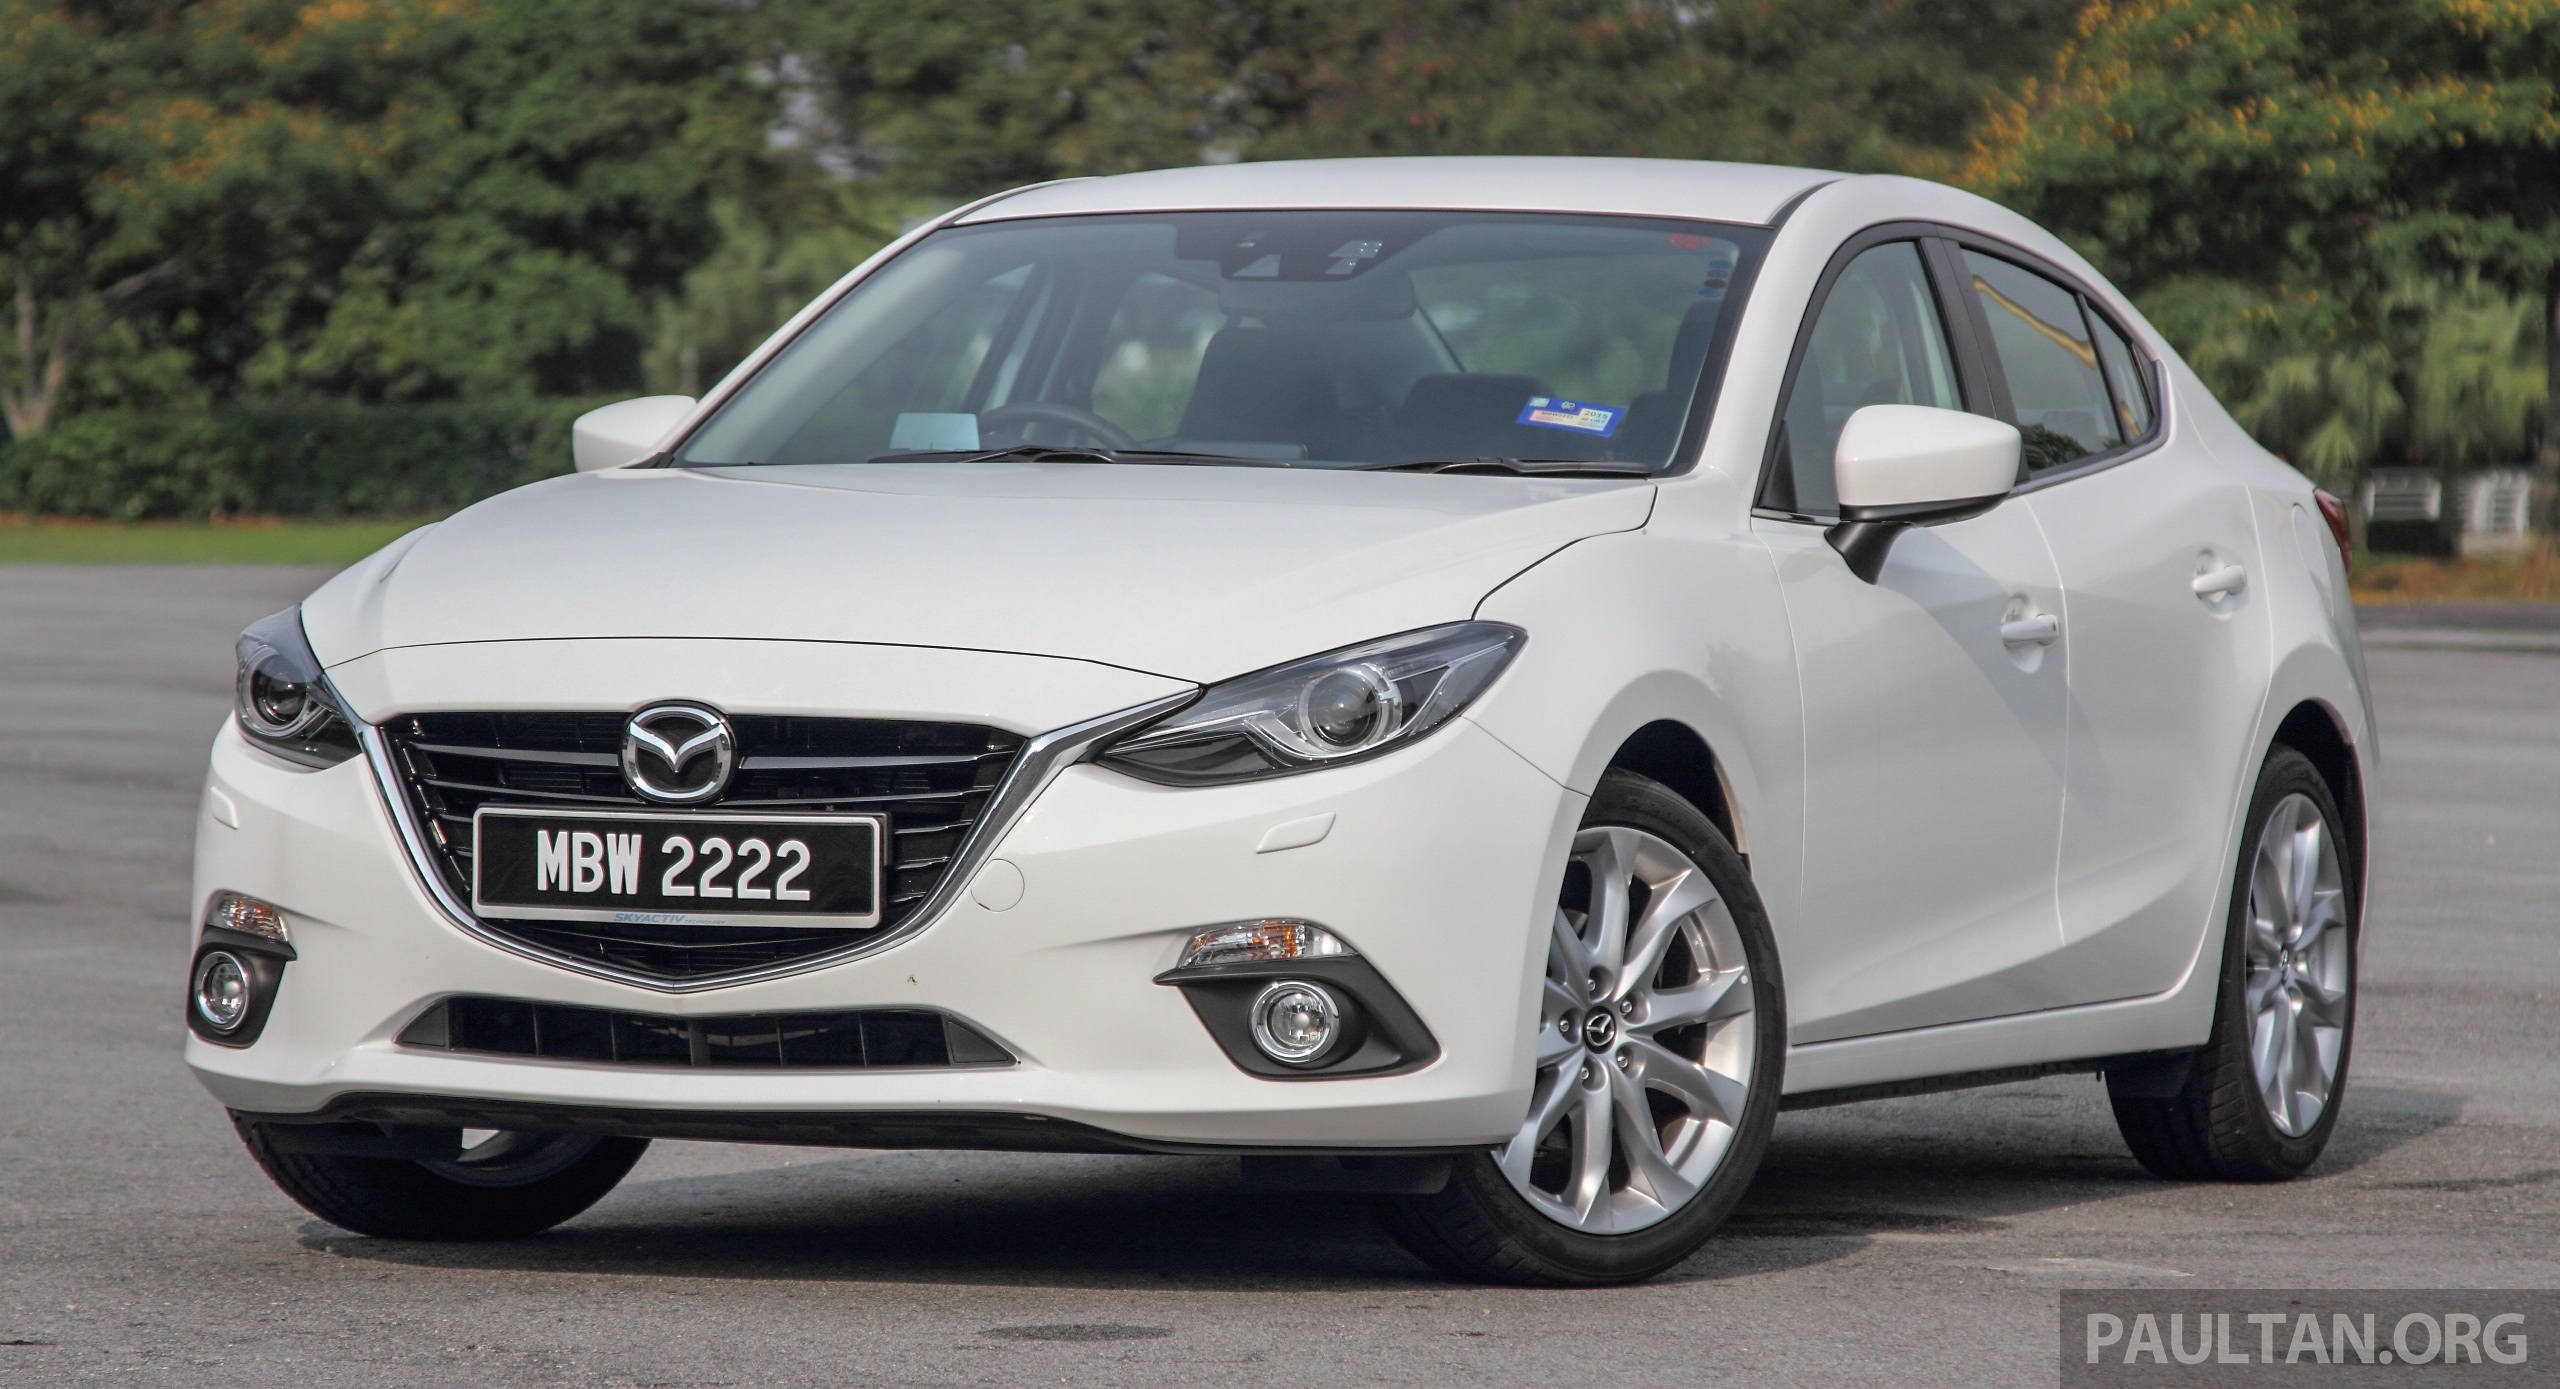 Mazda Malaysia vehicle prices hiked by up to RM6k